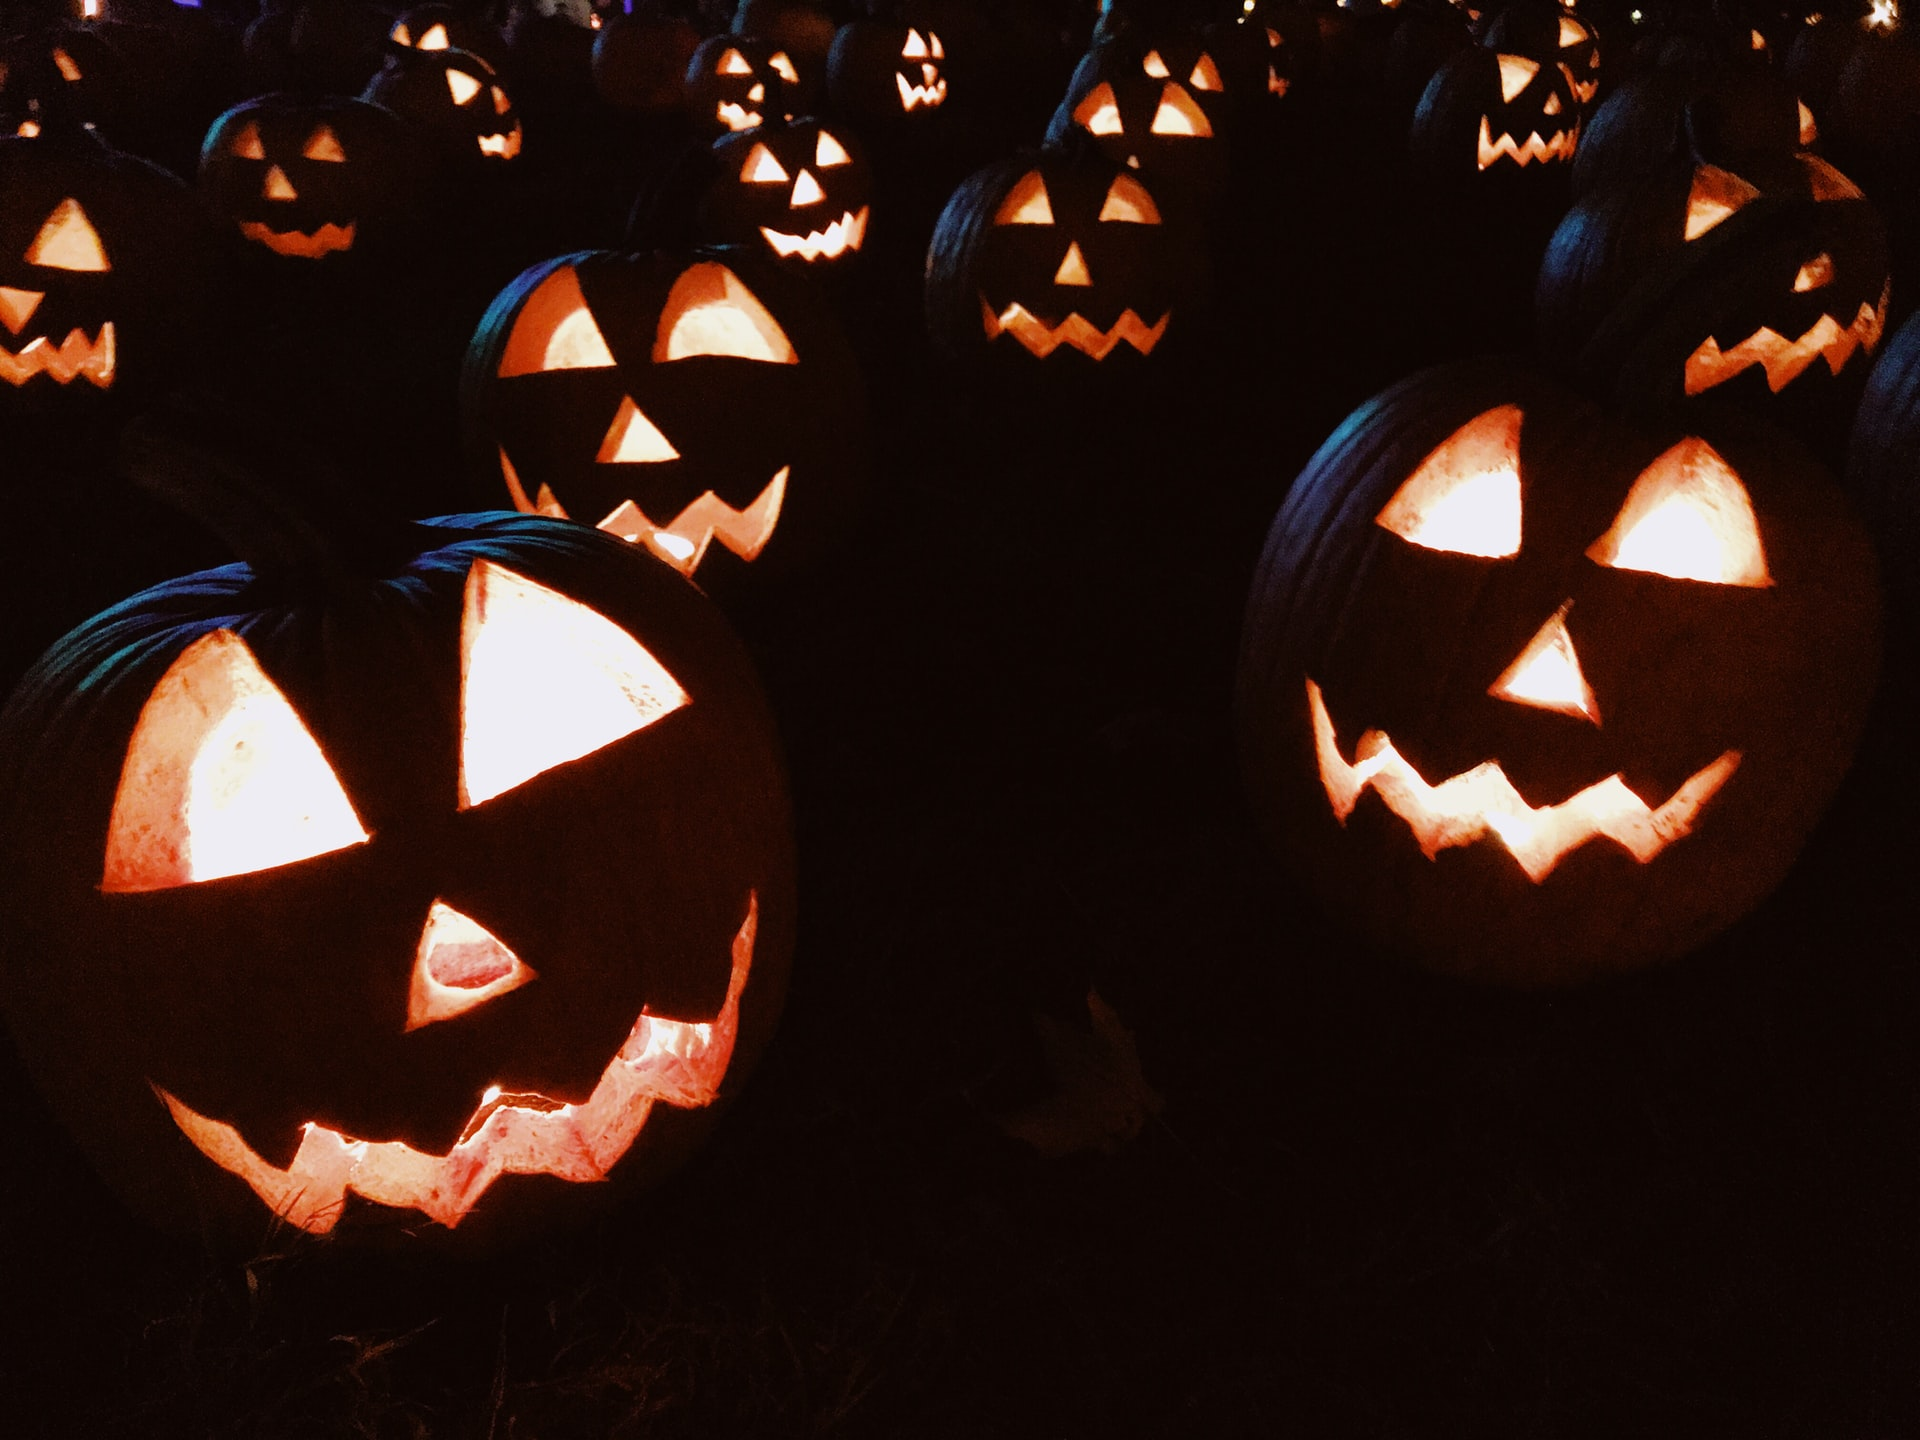 A pumpkin patch with Halloween-themed carved pumpkins.